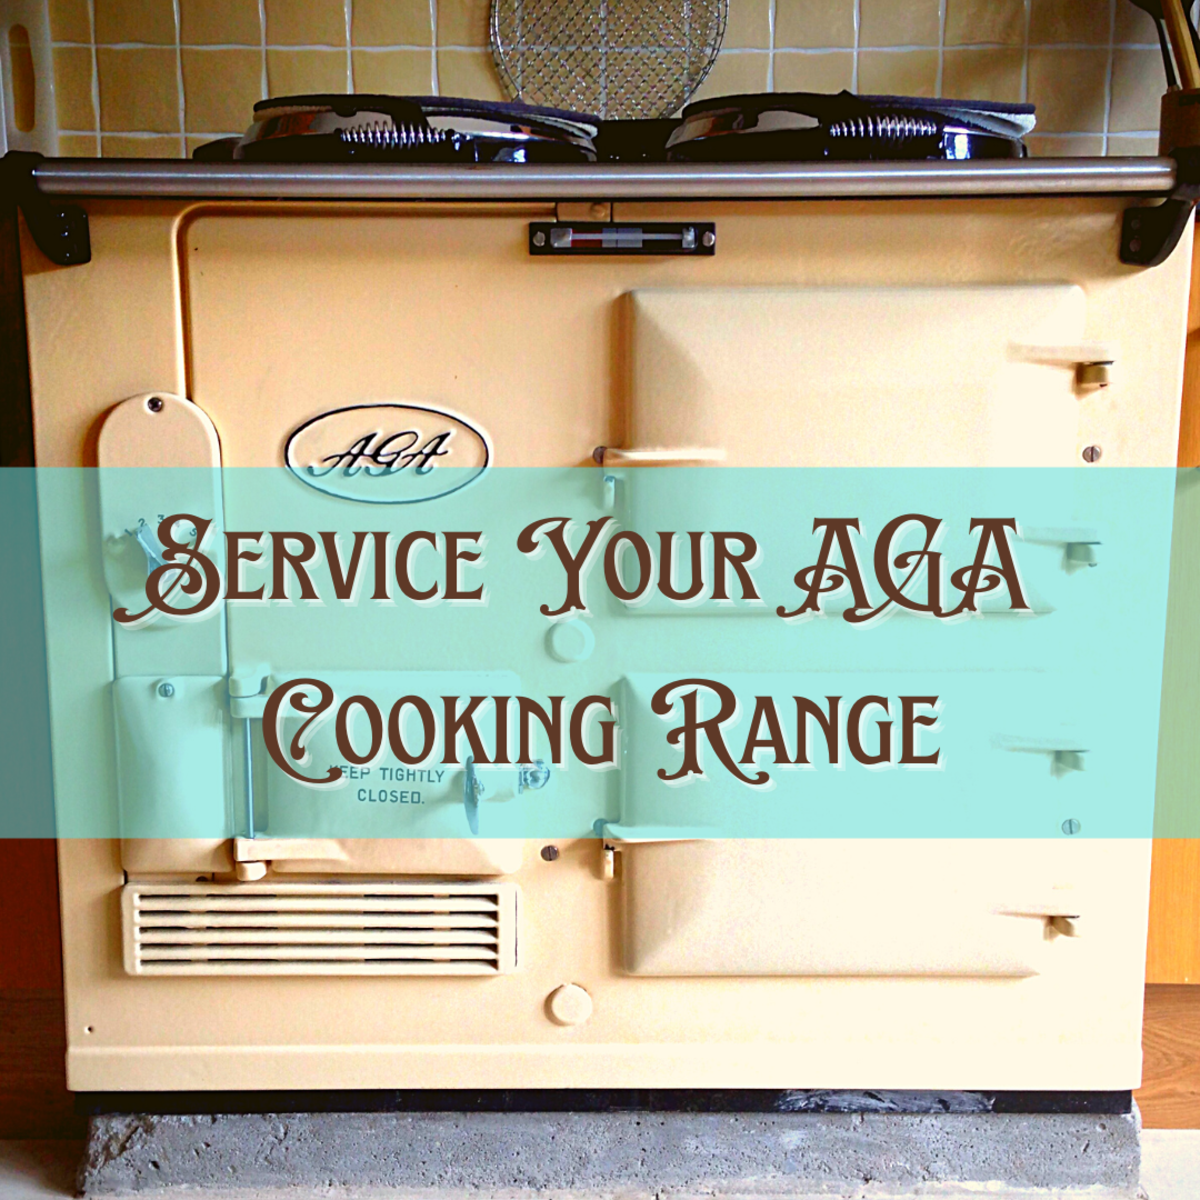 How to Service an Old Aga Cooking Range